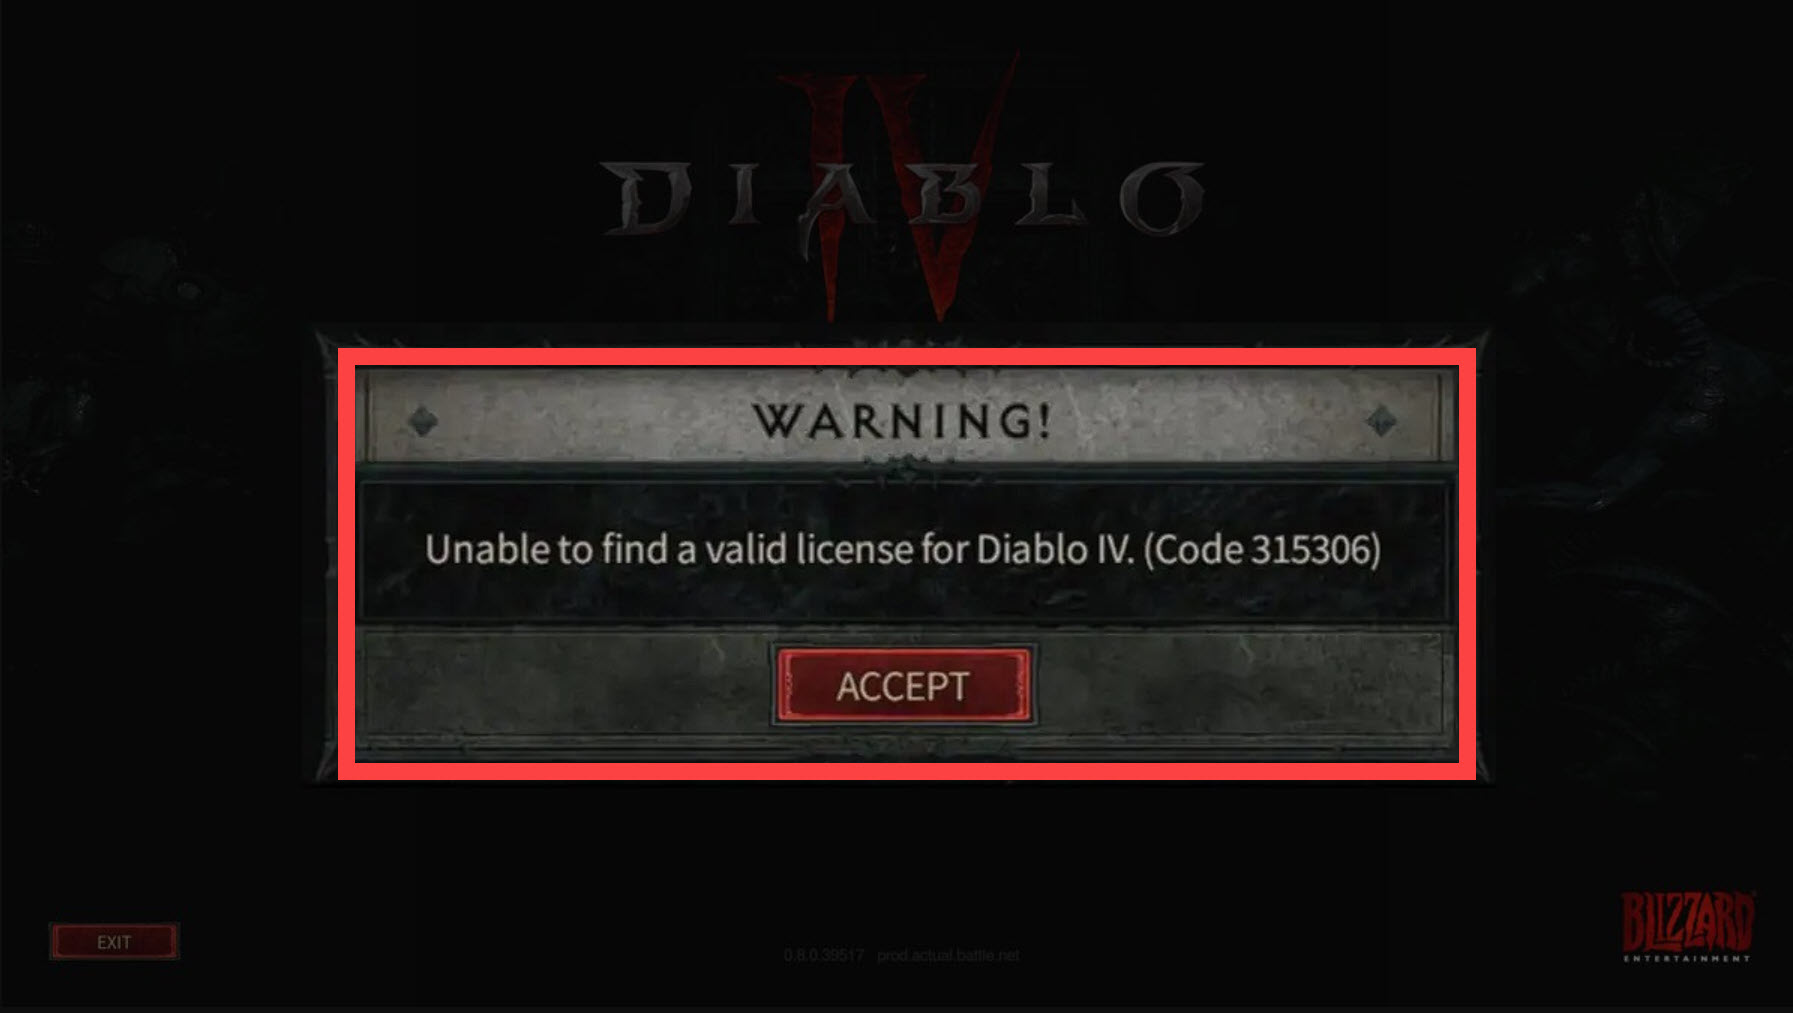 Fix unable to find a valid license for Diablo 4